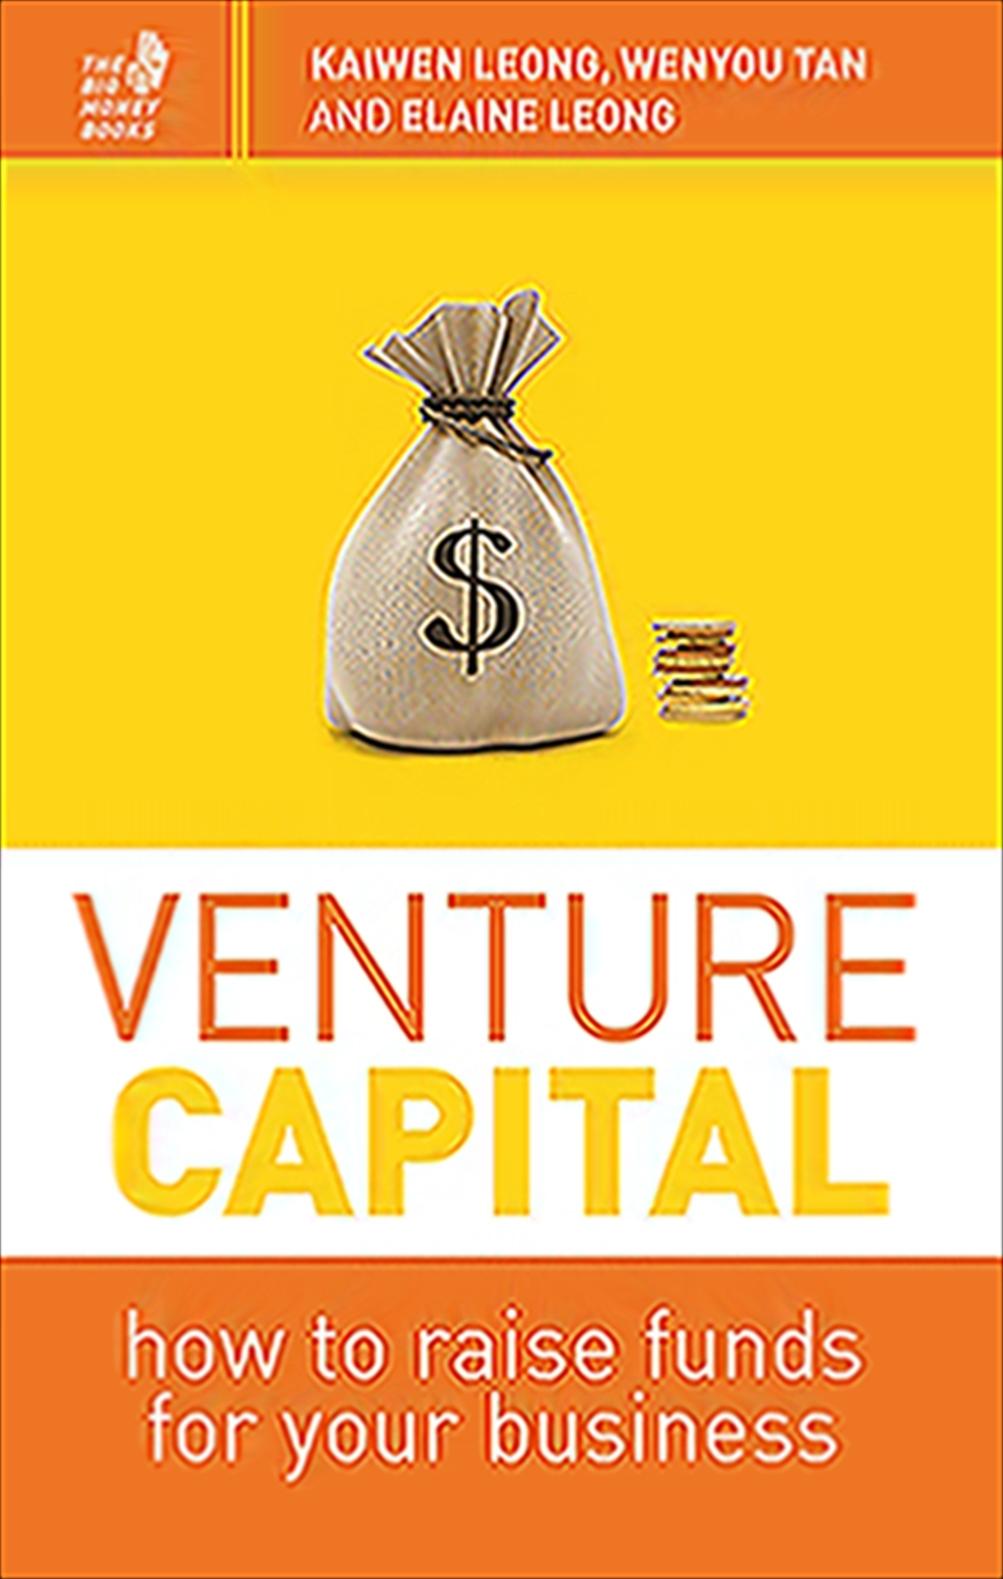 Venture Capital "How to Raise Funds for Your Business"